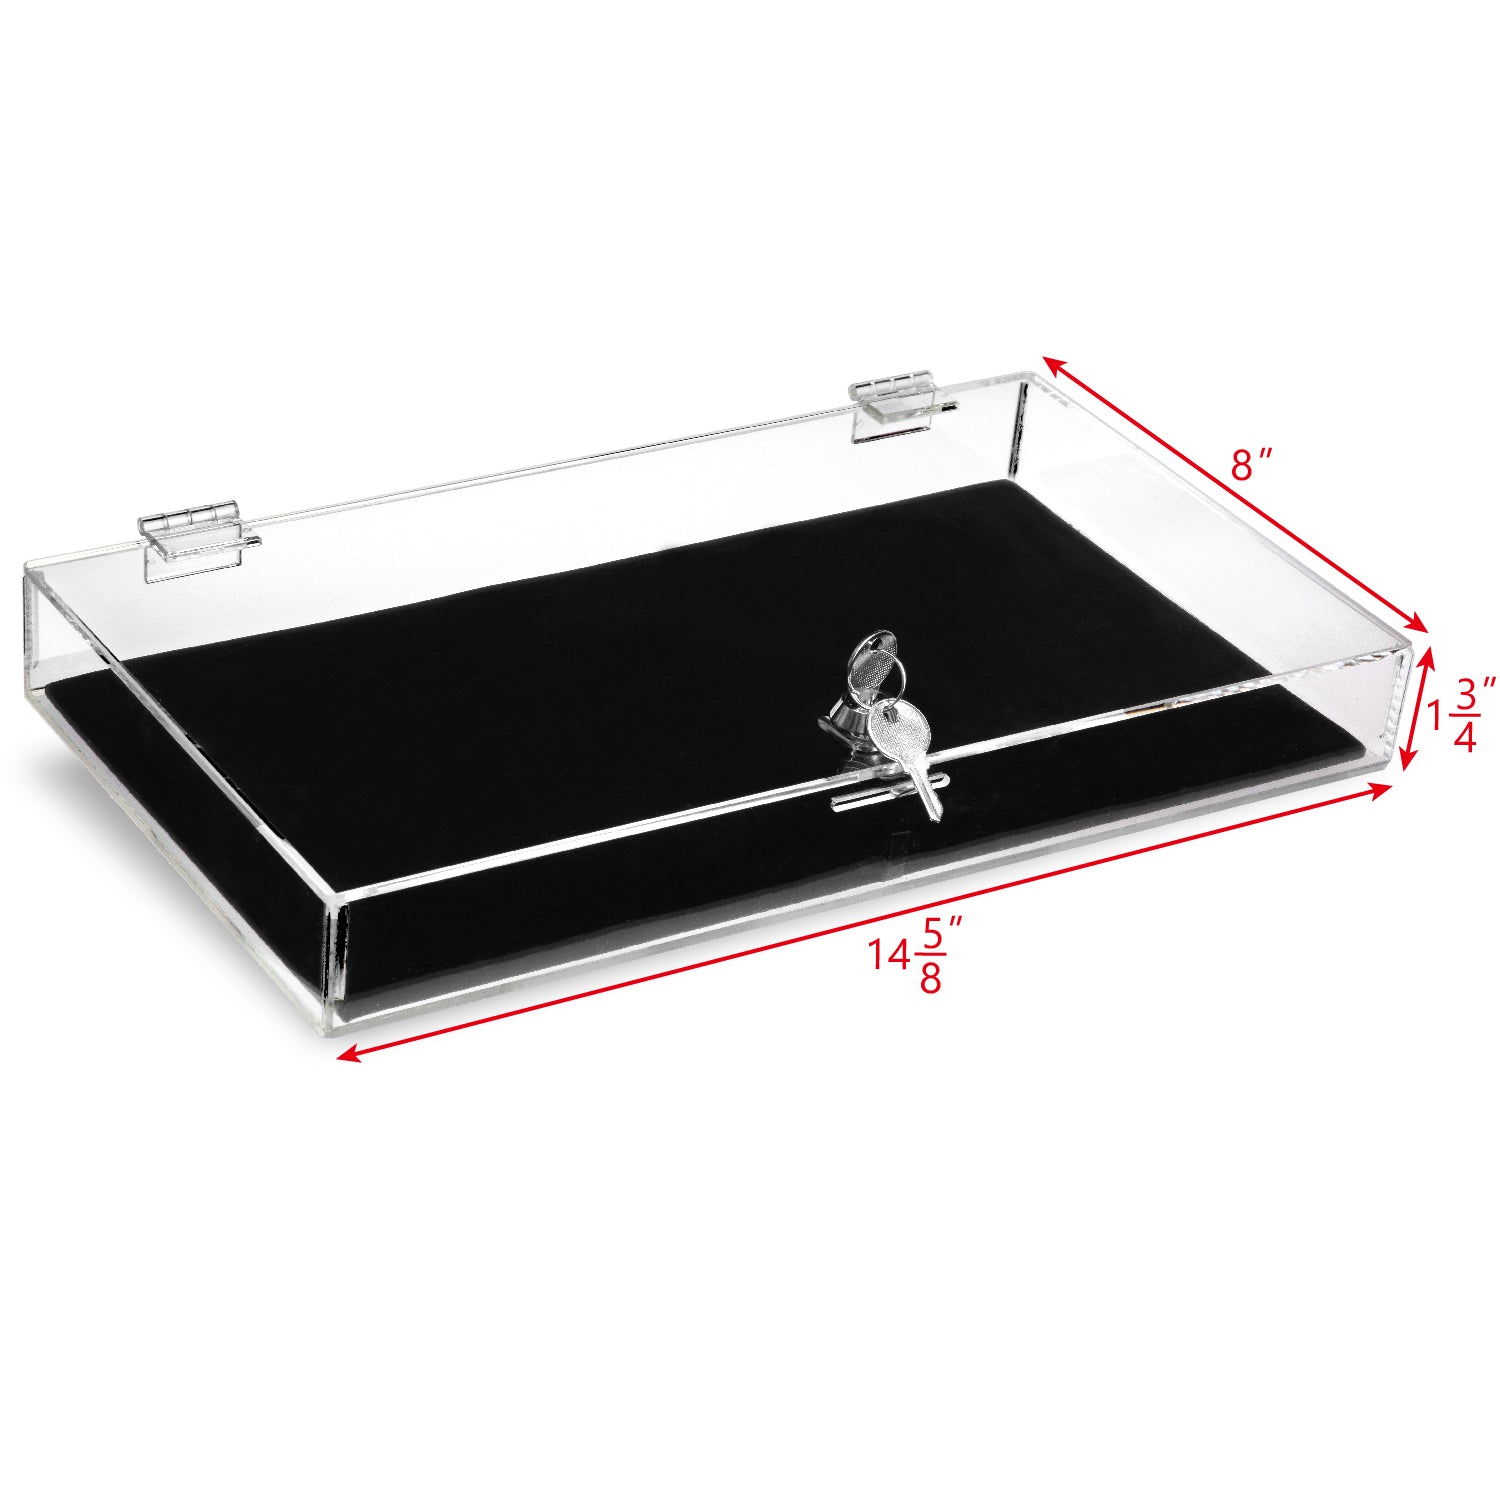 #TRJ2656 Acrylic Marketing Holder Locking Showcase Box Display Tray for Watches Jewelry Collector Knives with a Key.